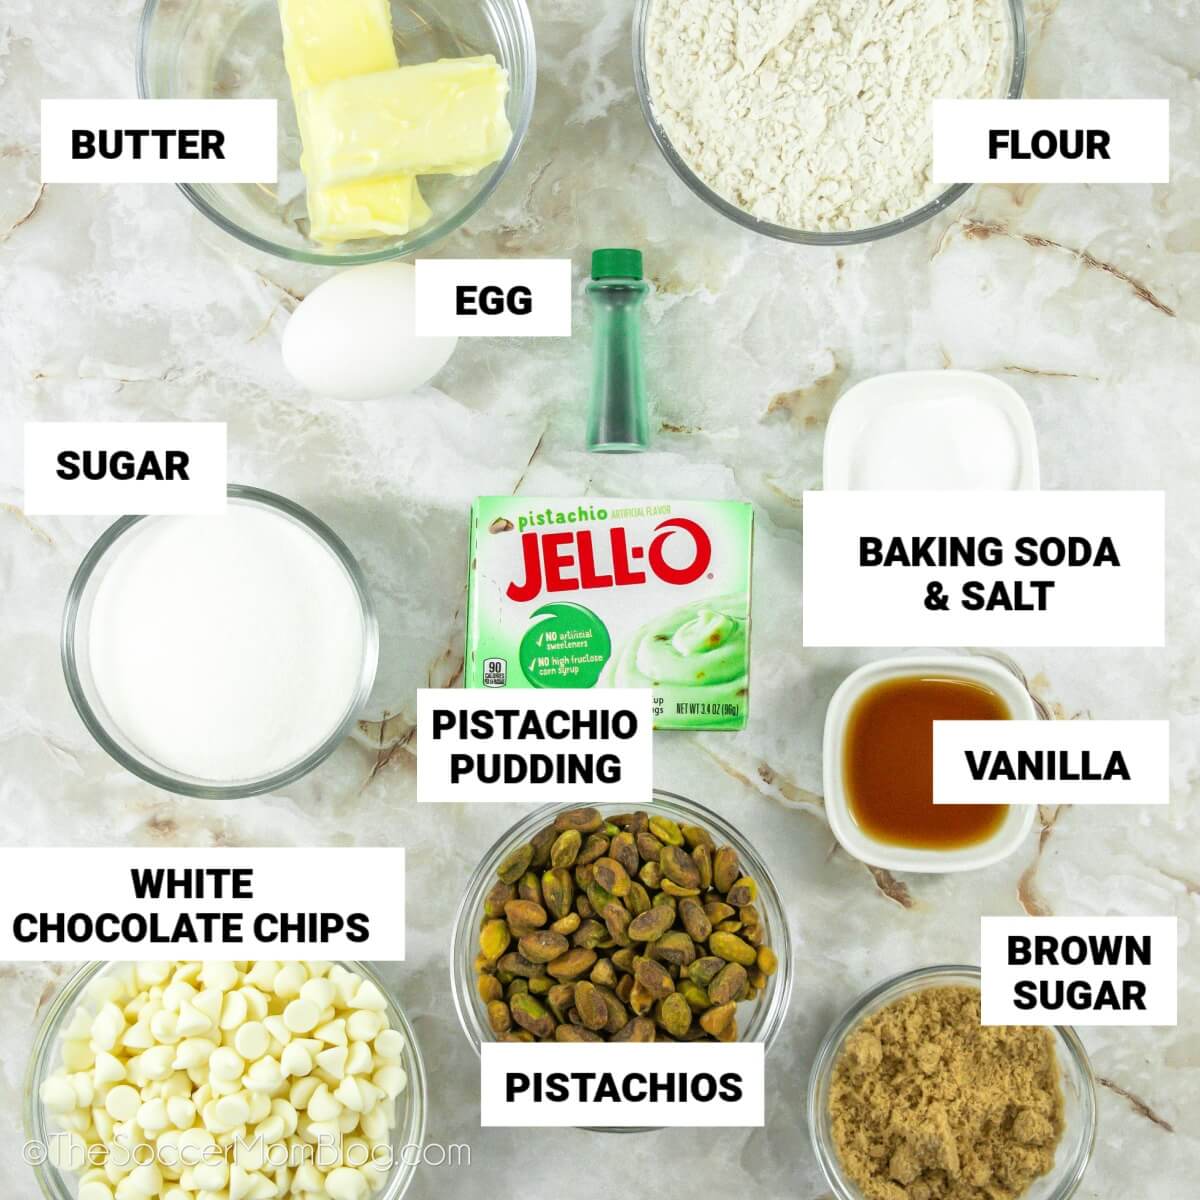 Pistachio Pudding Cookies Ingredients, with text labels.